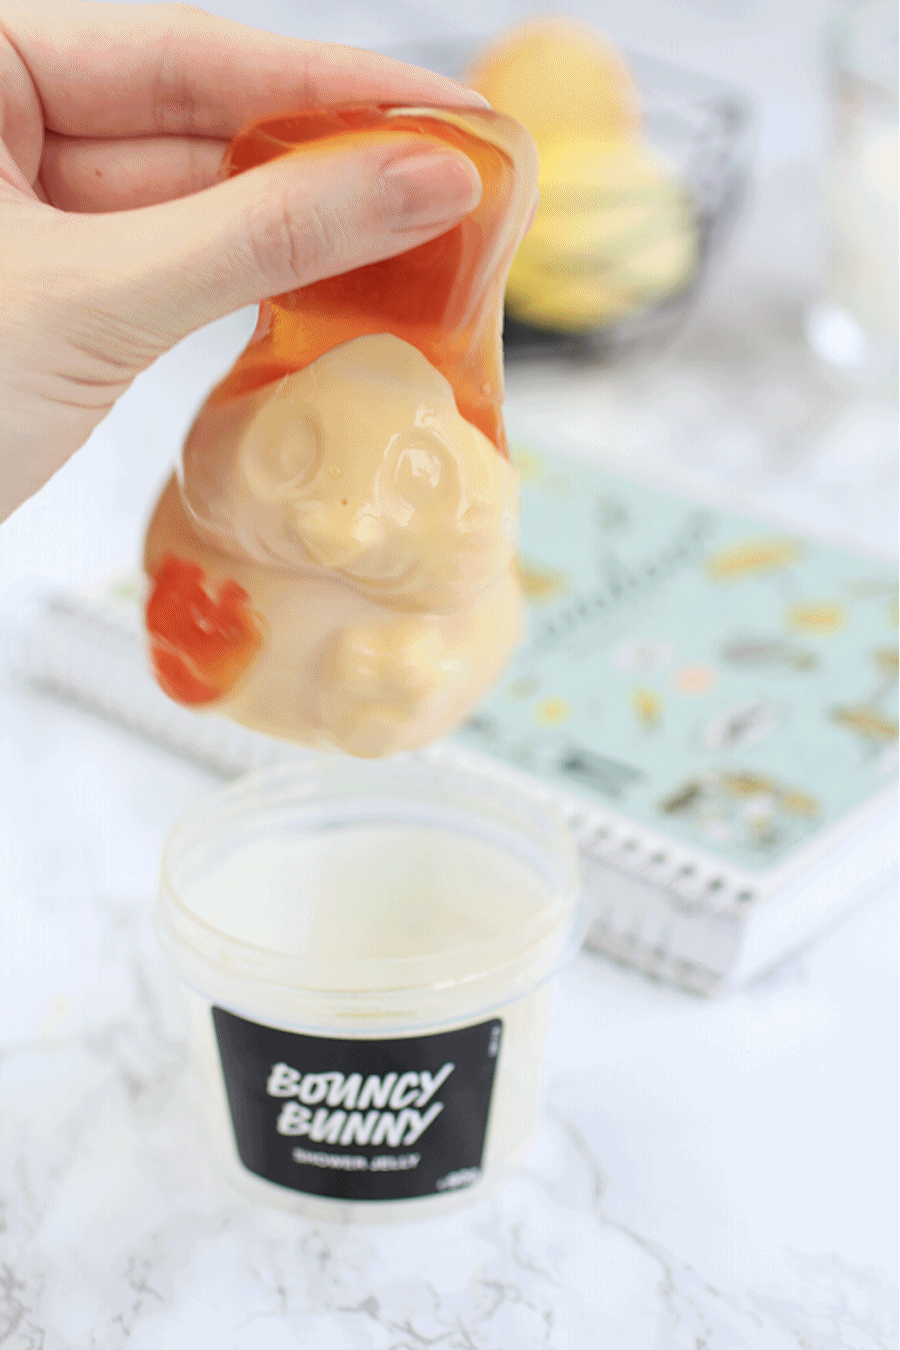 Lush  Bouncy Bunny review